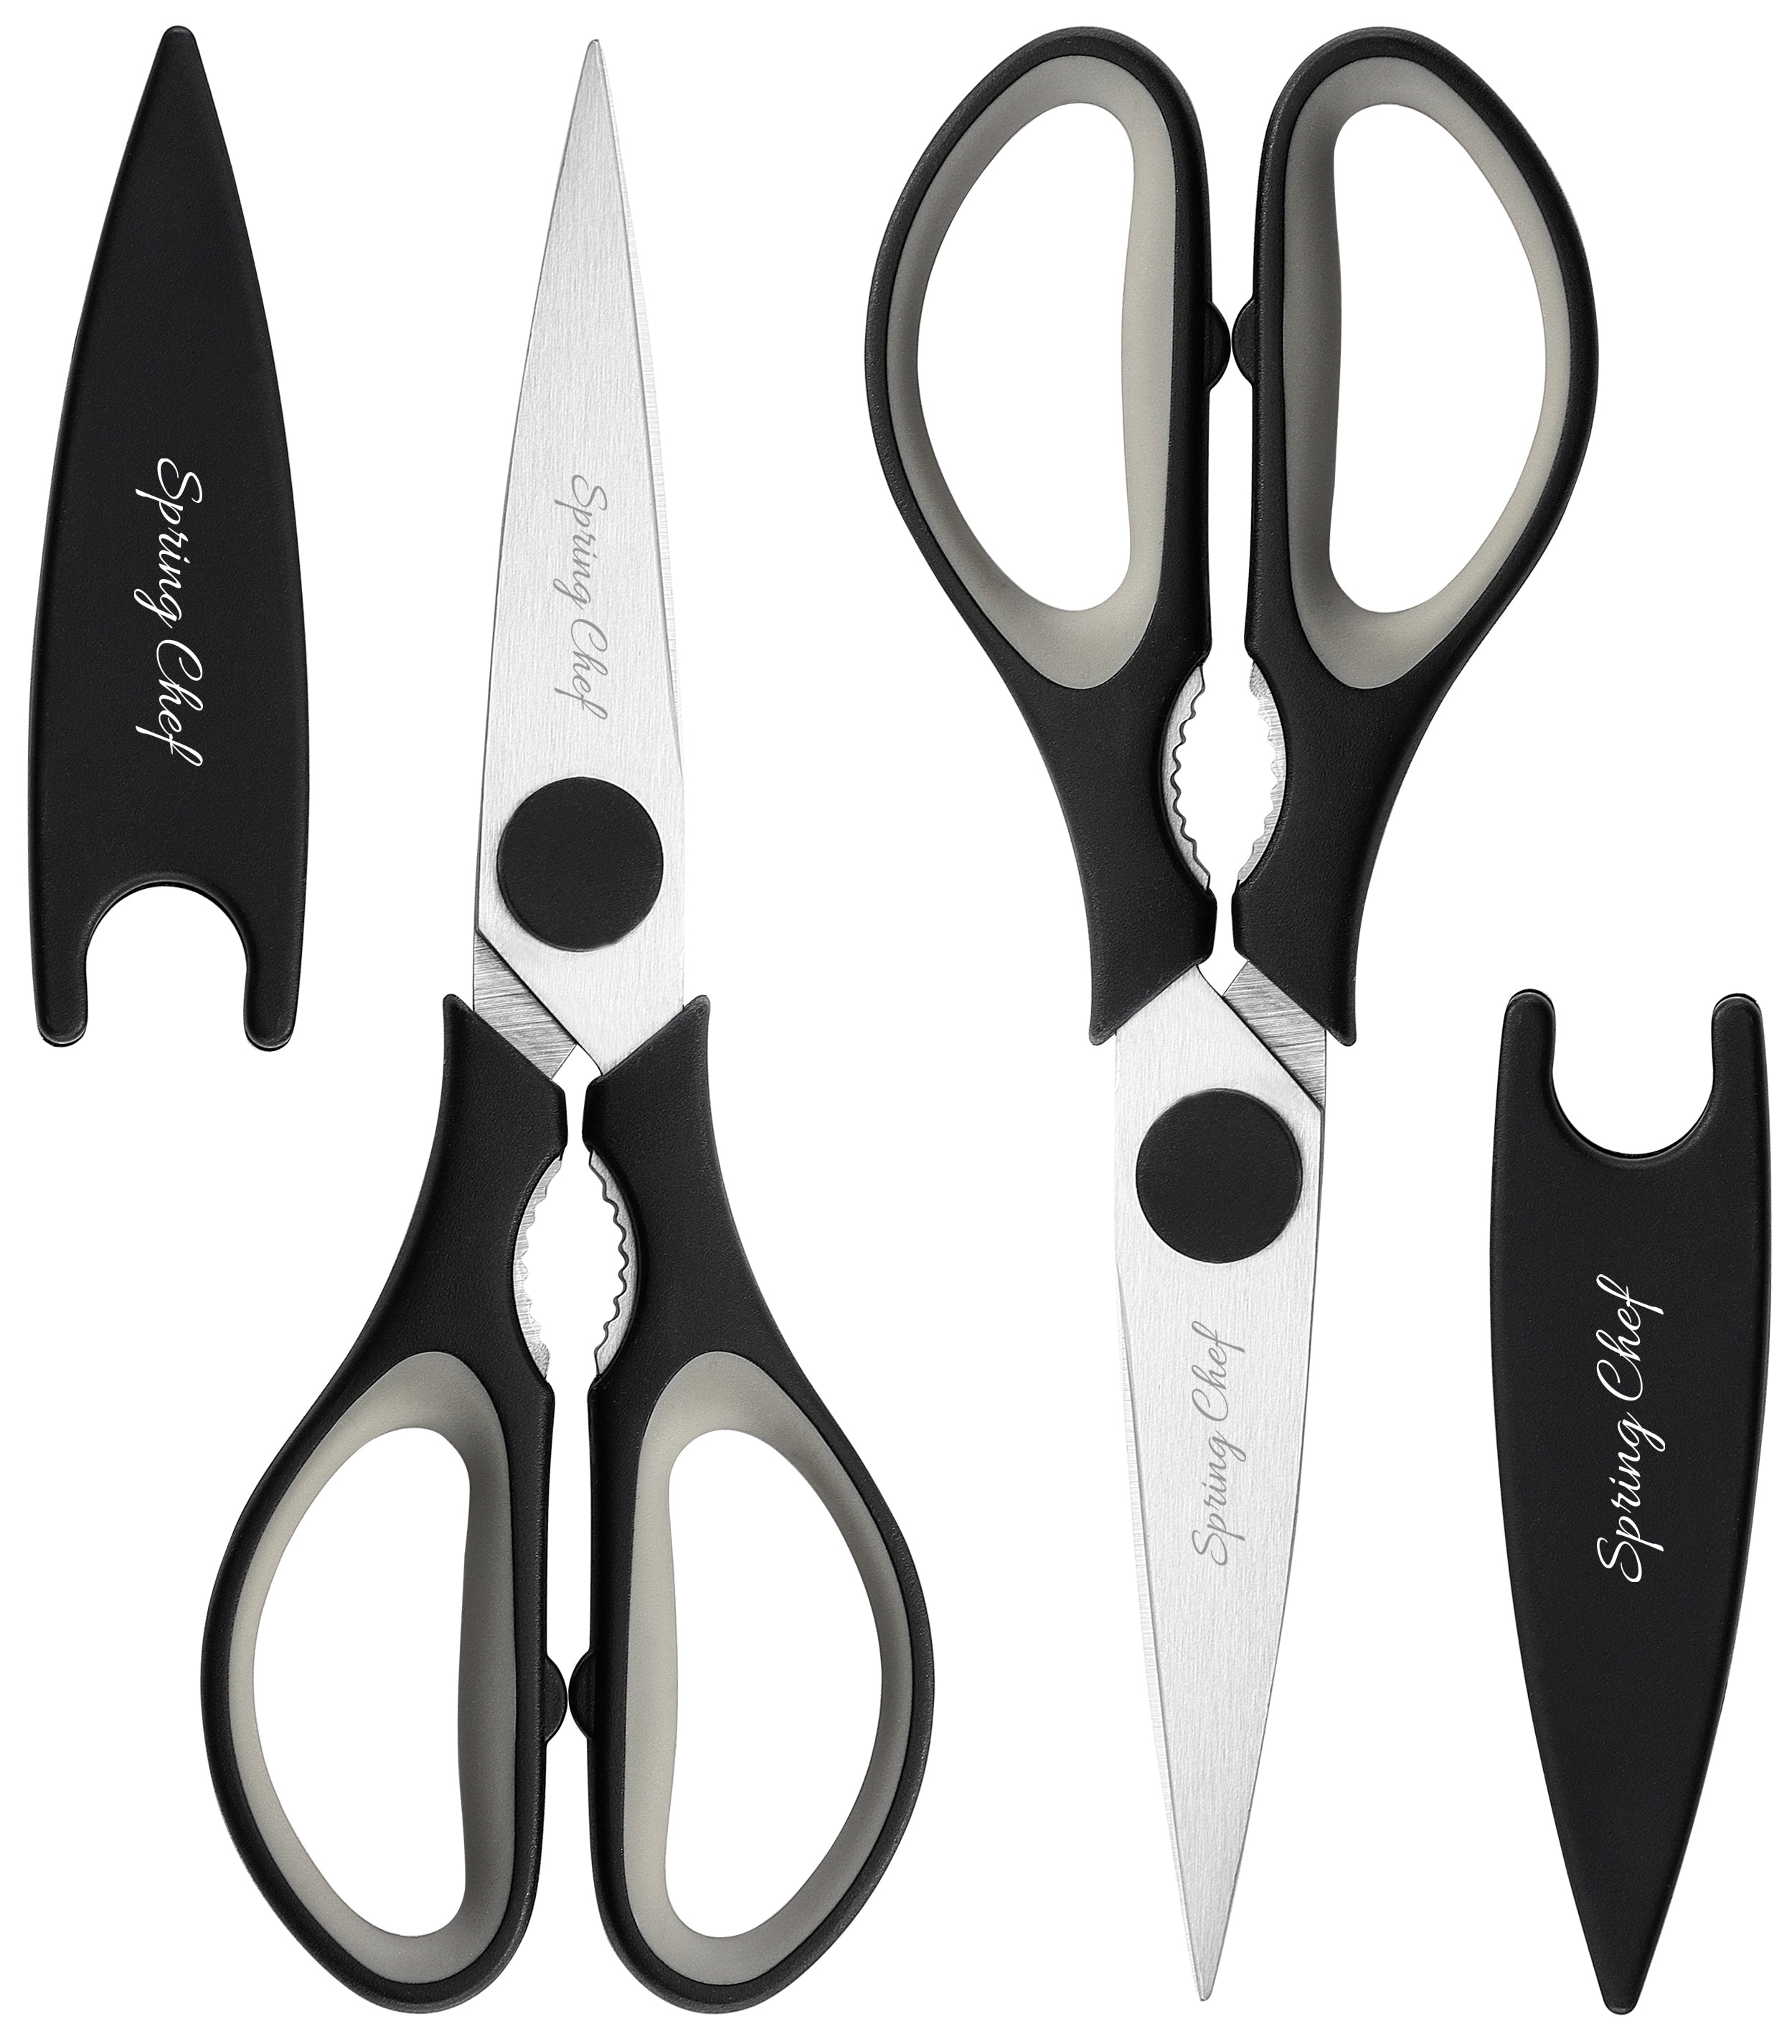 Pampered Chef professional kitchen shears scissors for cutting slicing  fresh vegetables homemade pasta black gray stainless steel